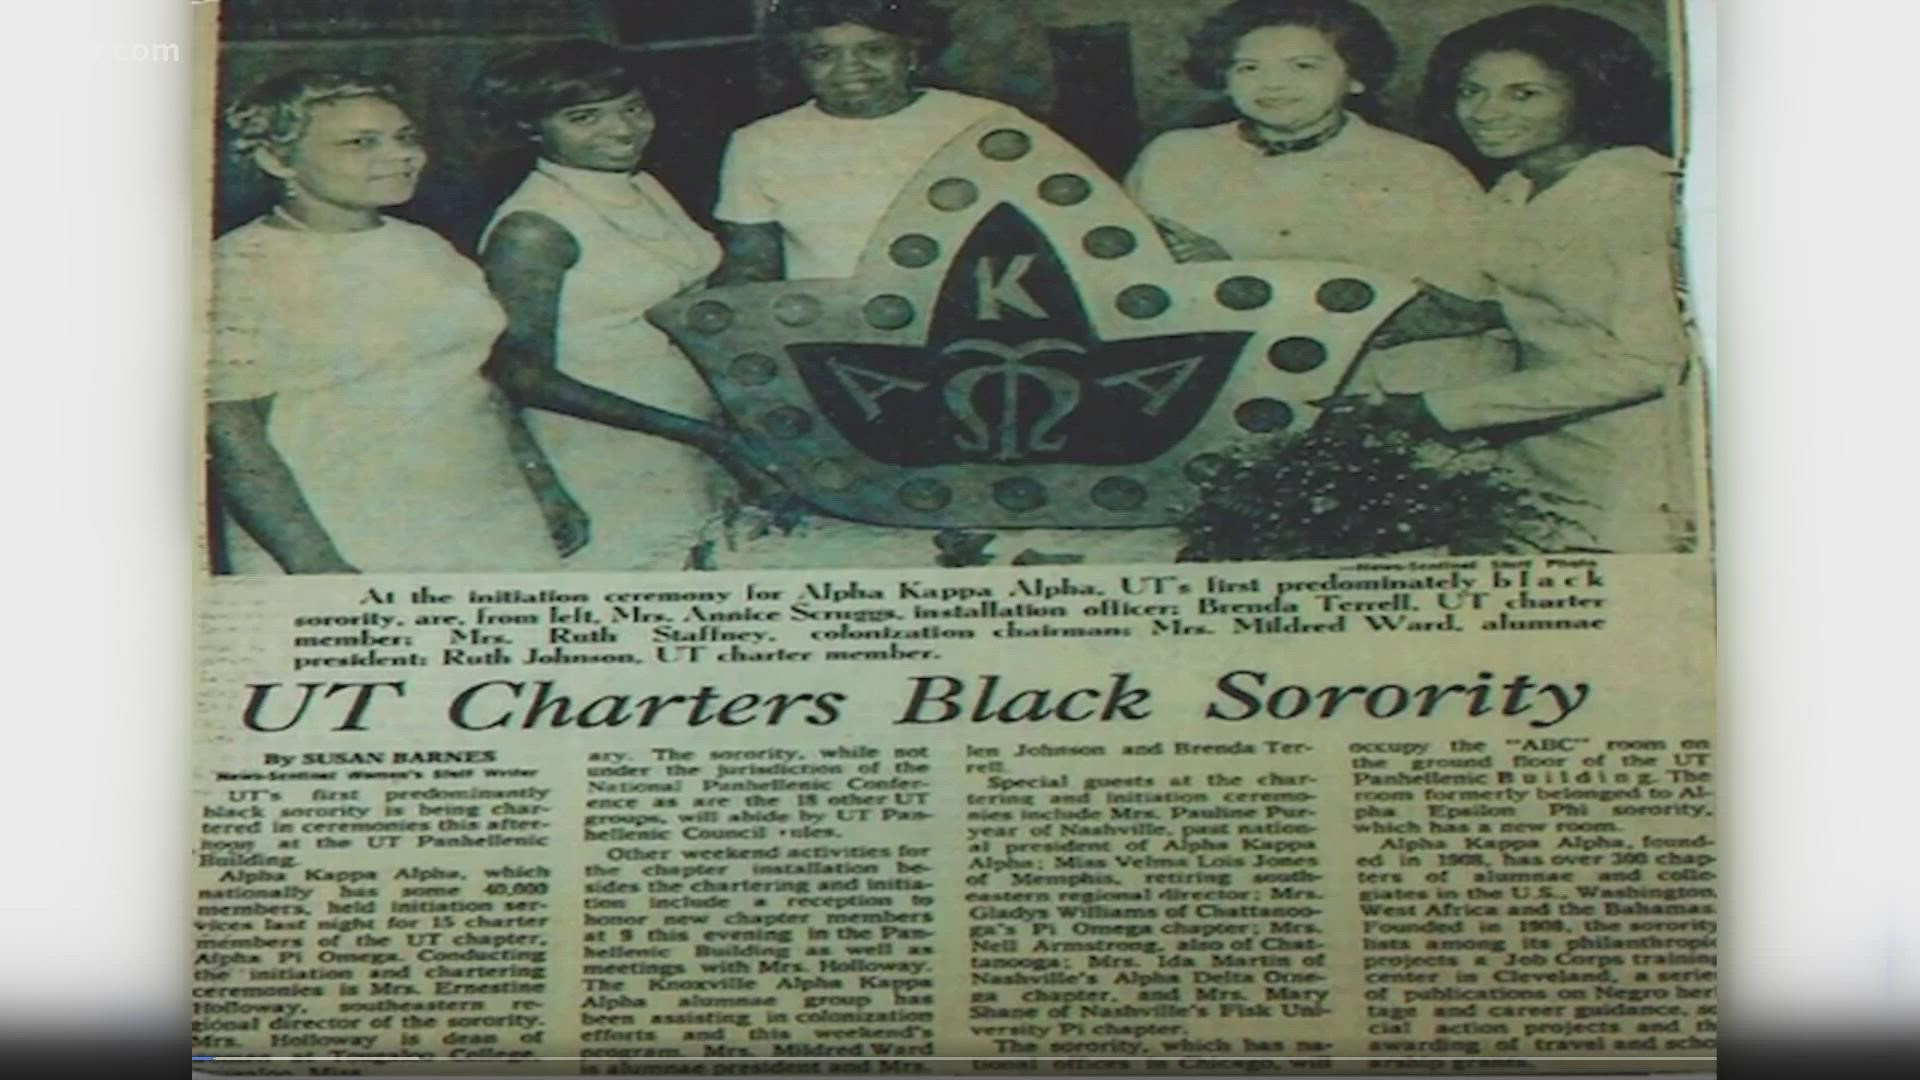 Saturday marked the 114th anniversary of when Alpha Kappa Alpha was created as a way for Black women to find support through college.